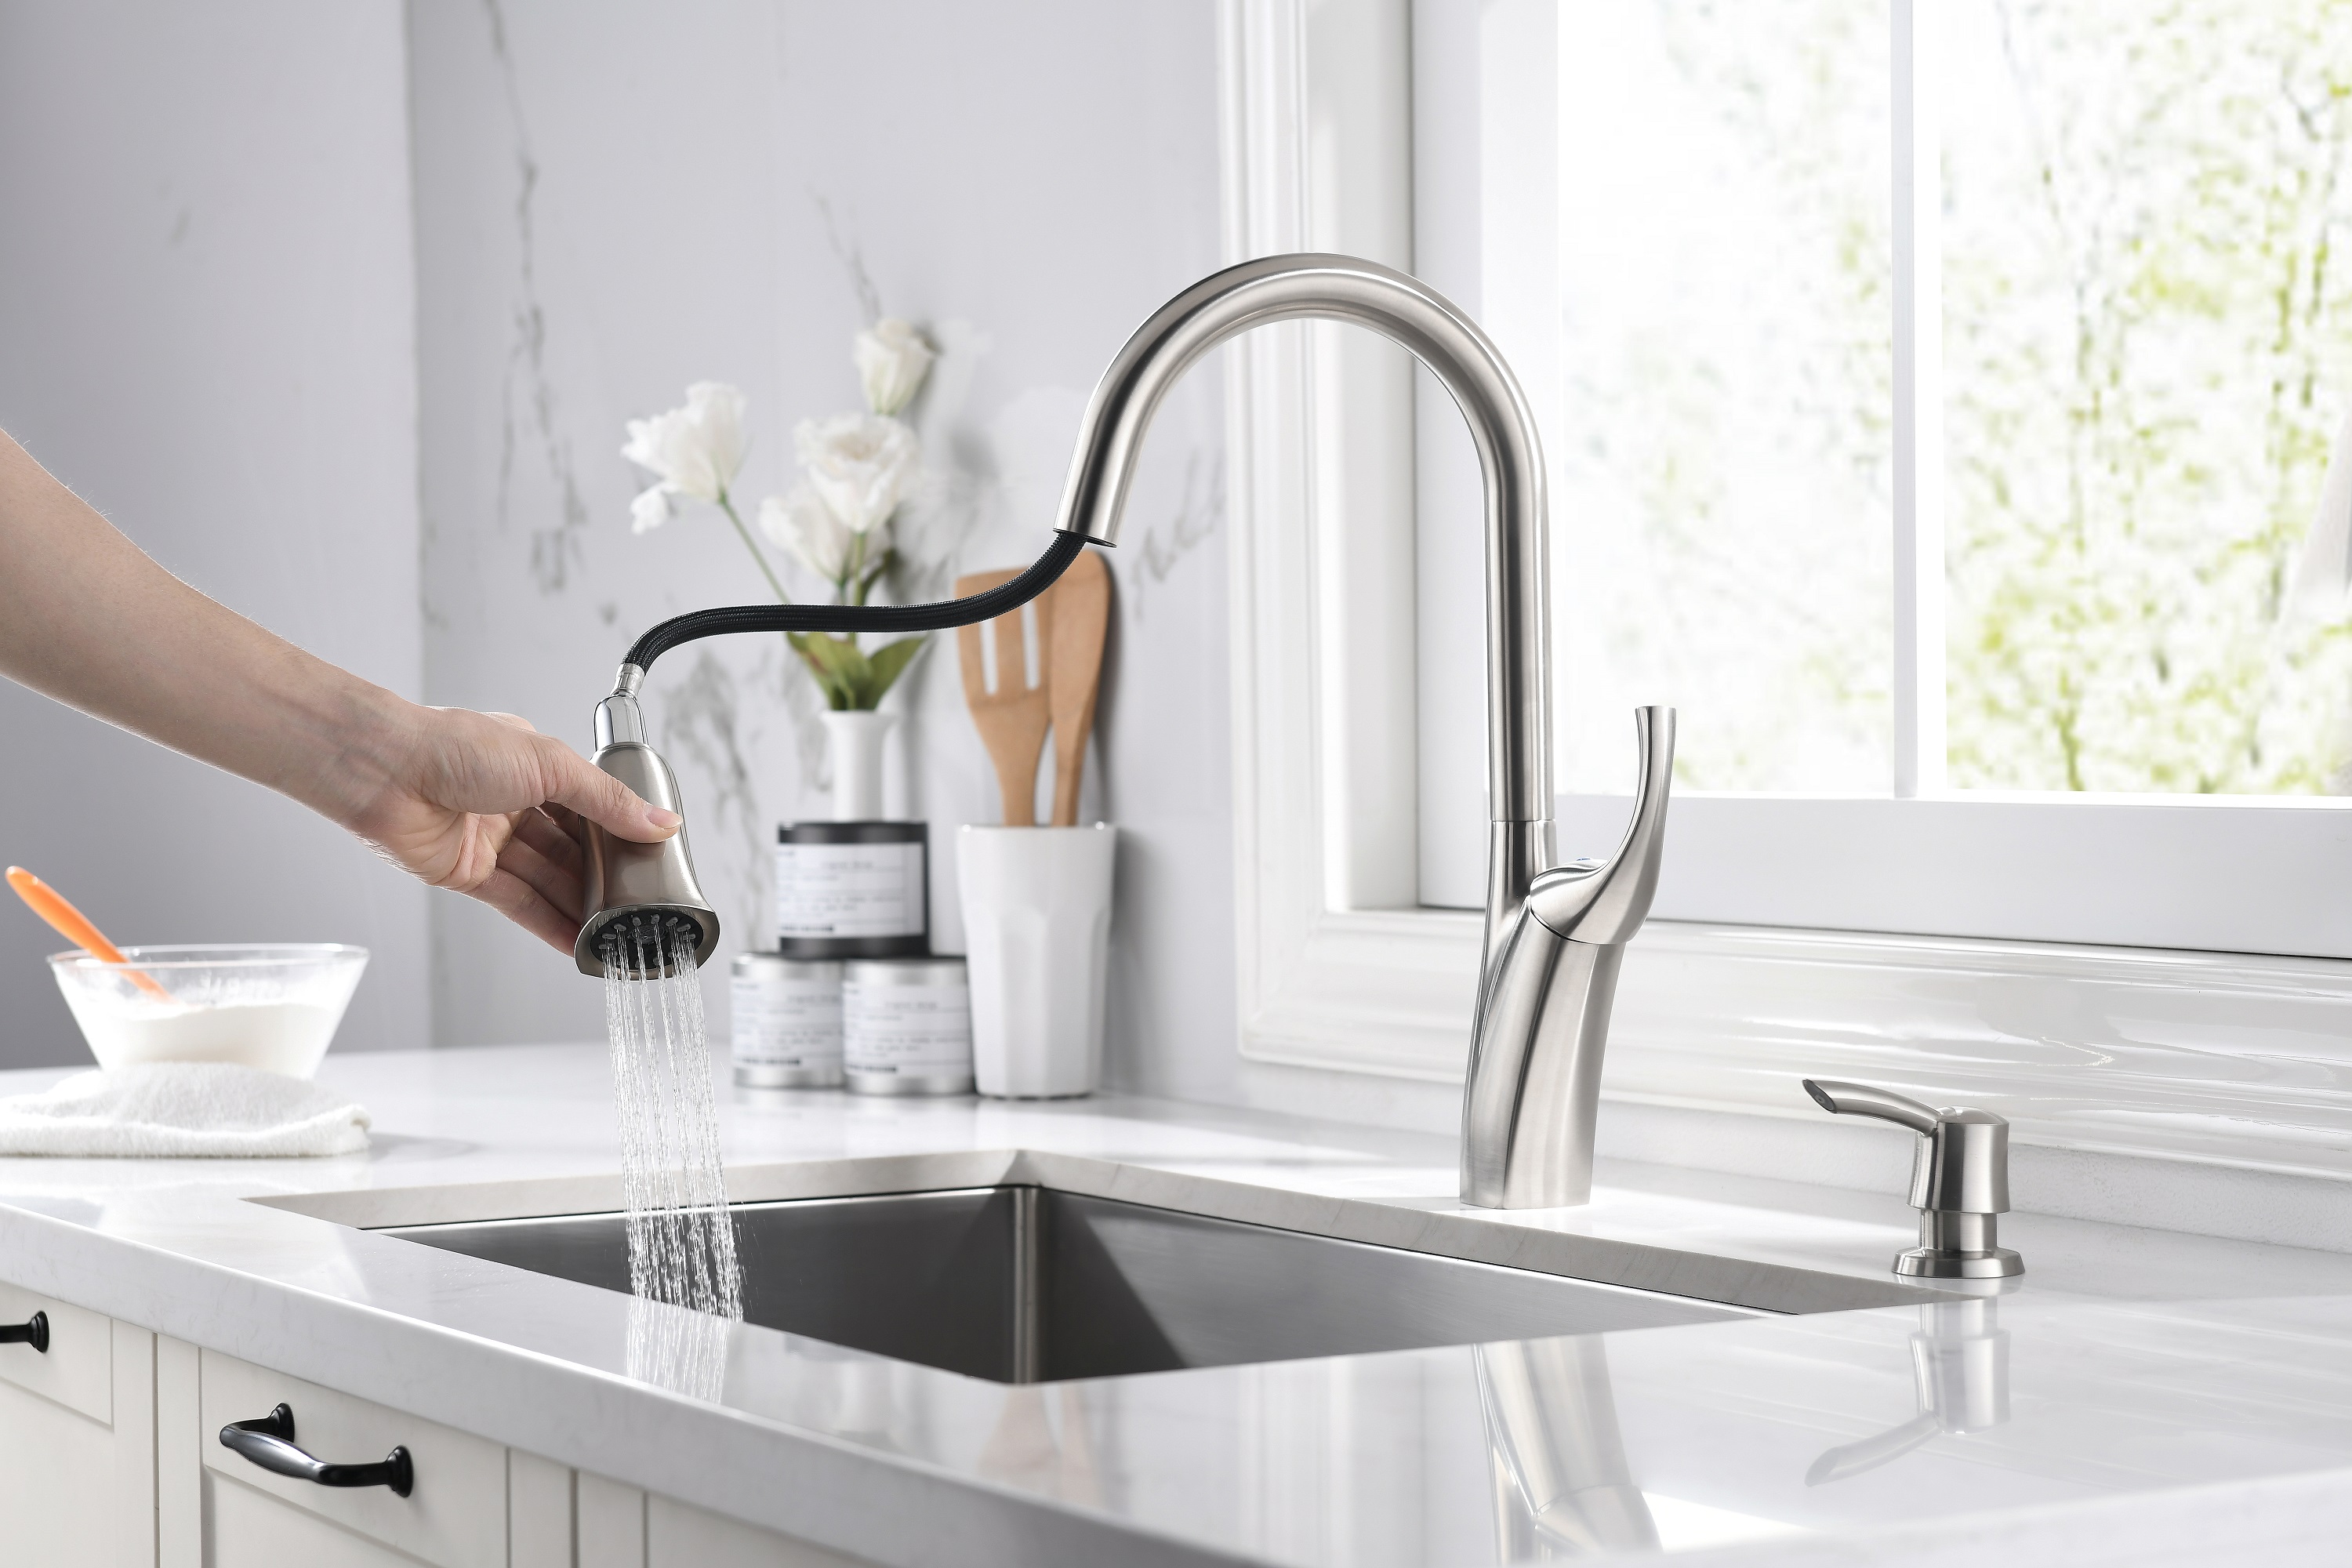 Classic Style Blackl Kitchen Faucet Pull Down Kithchen Faucet 